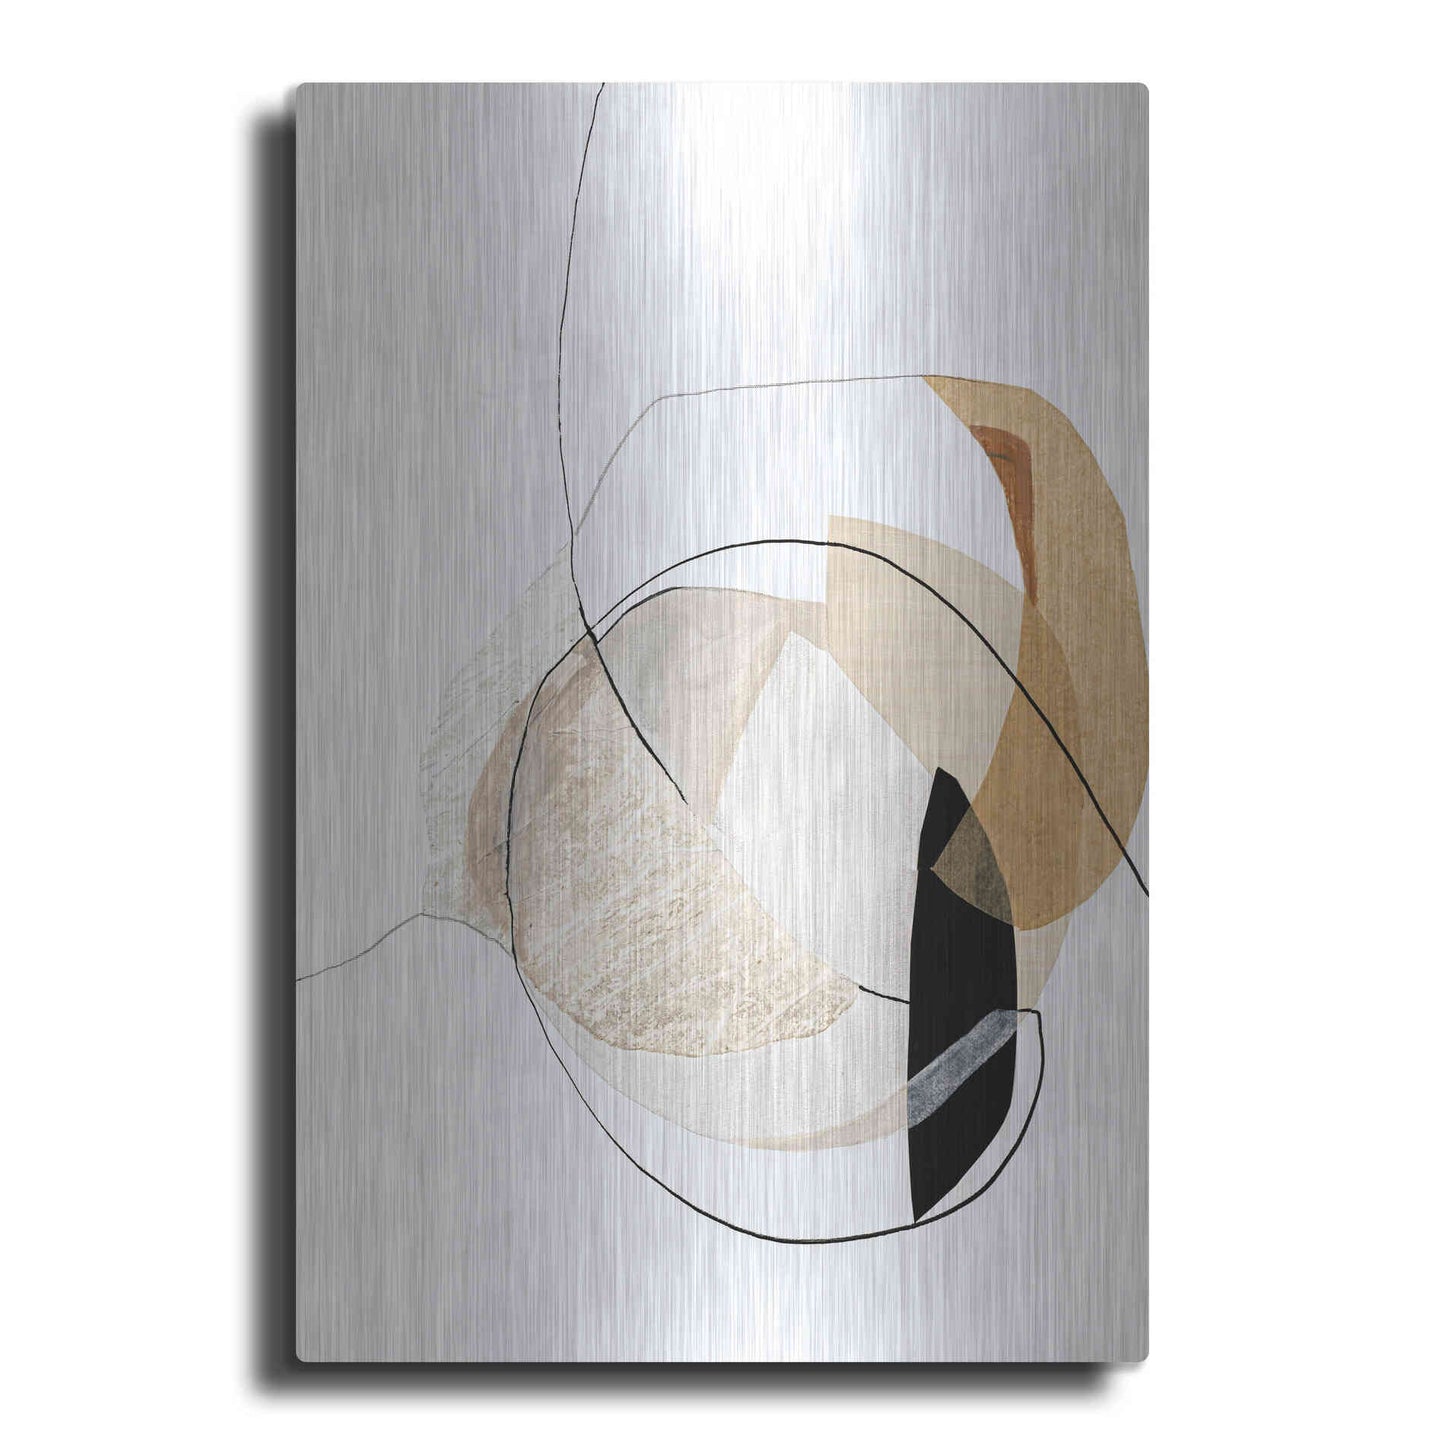 Luxe Metal Art 'Graphical Shapes 4' by Design Fabrikken, Metal Wall Art